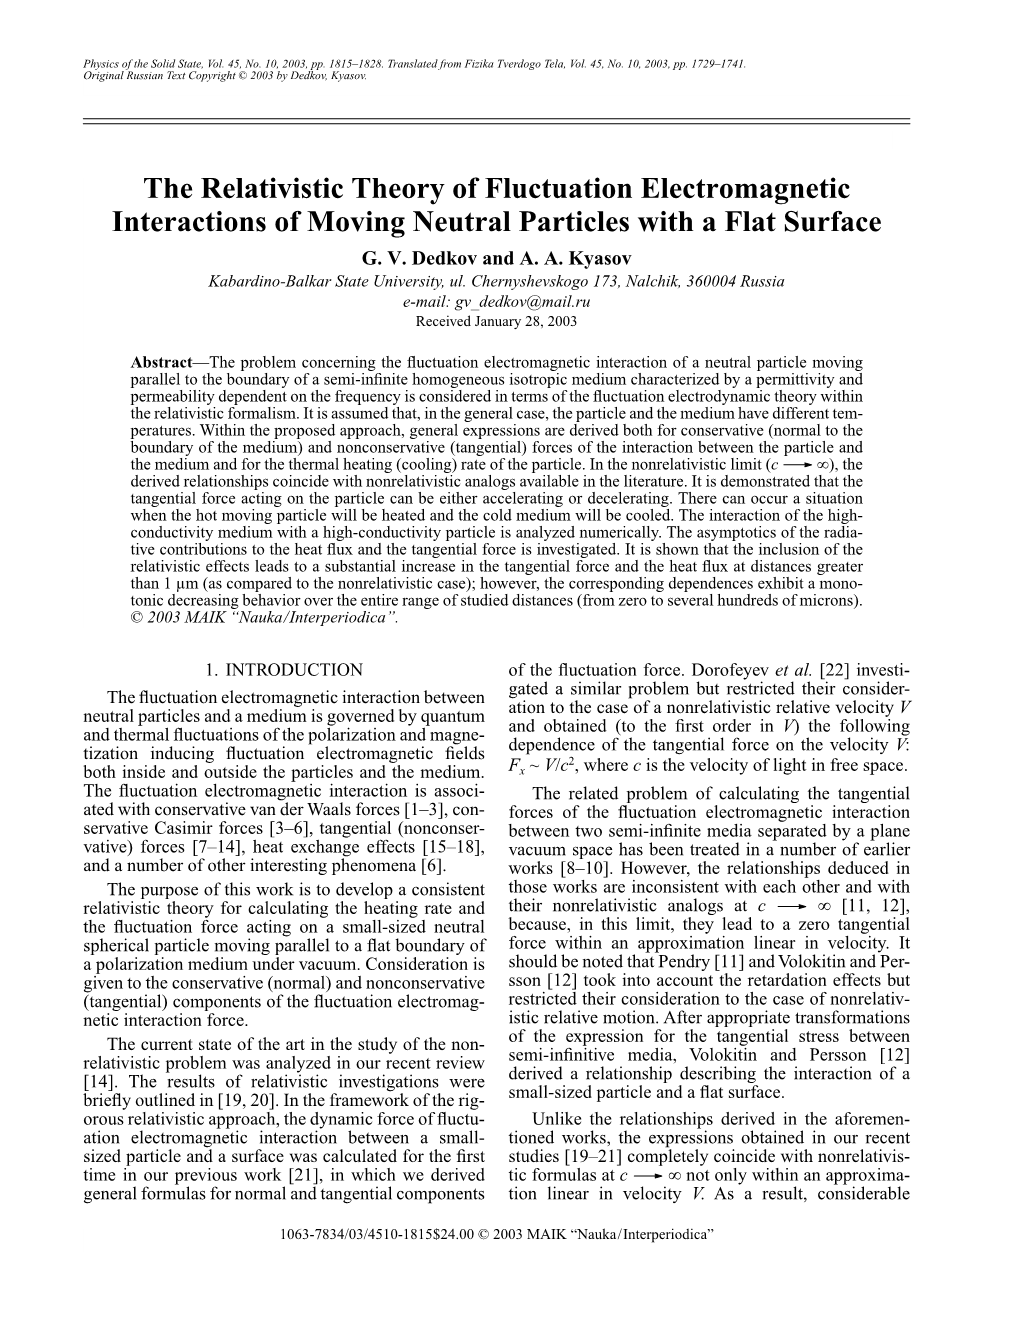 The Relativistic Theory of Fluctuation Electromagnetic Interactions of Moving Neutral Particles with a Flat Surface G